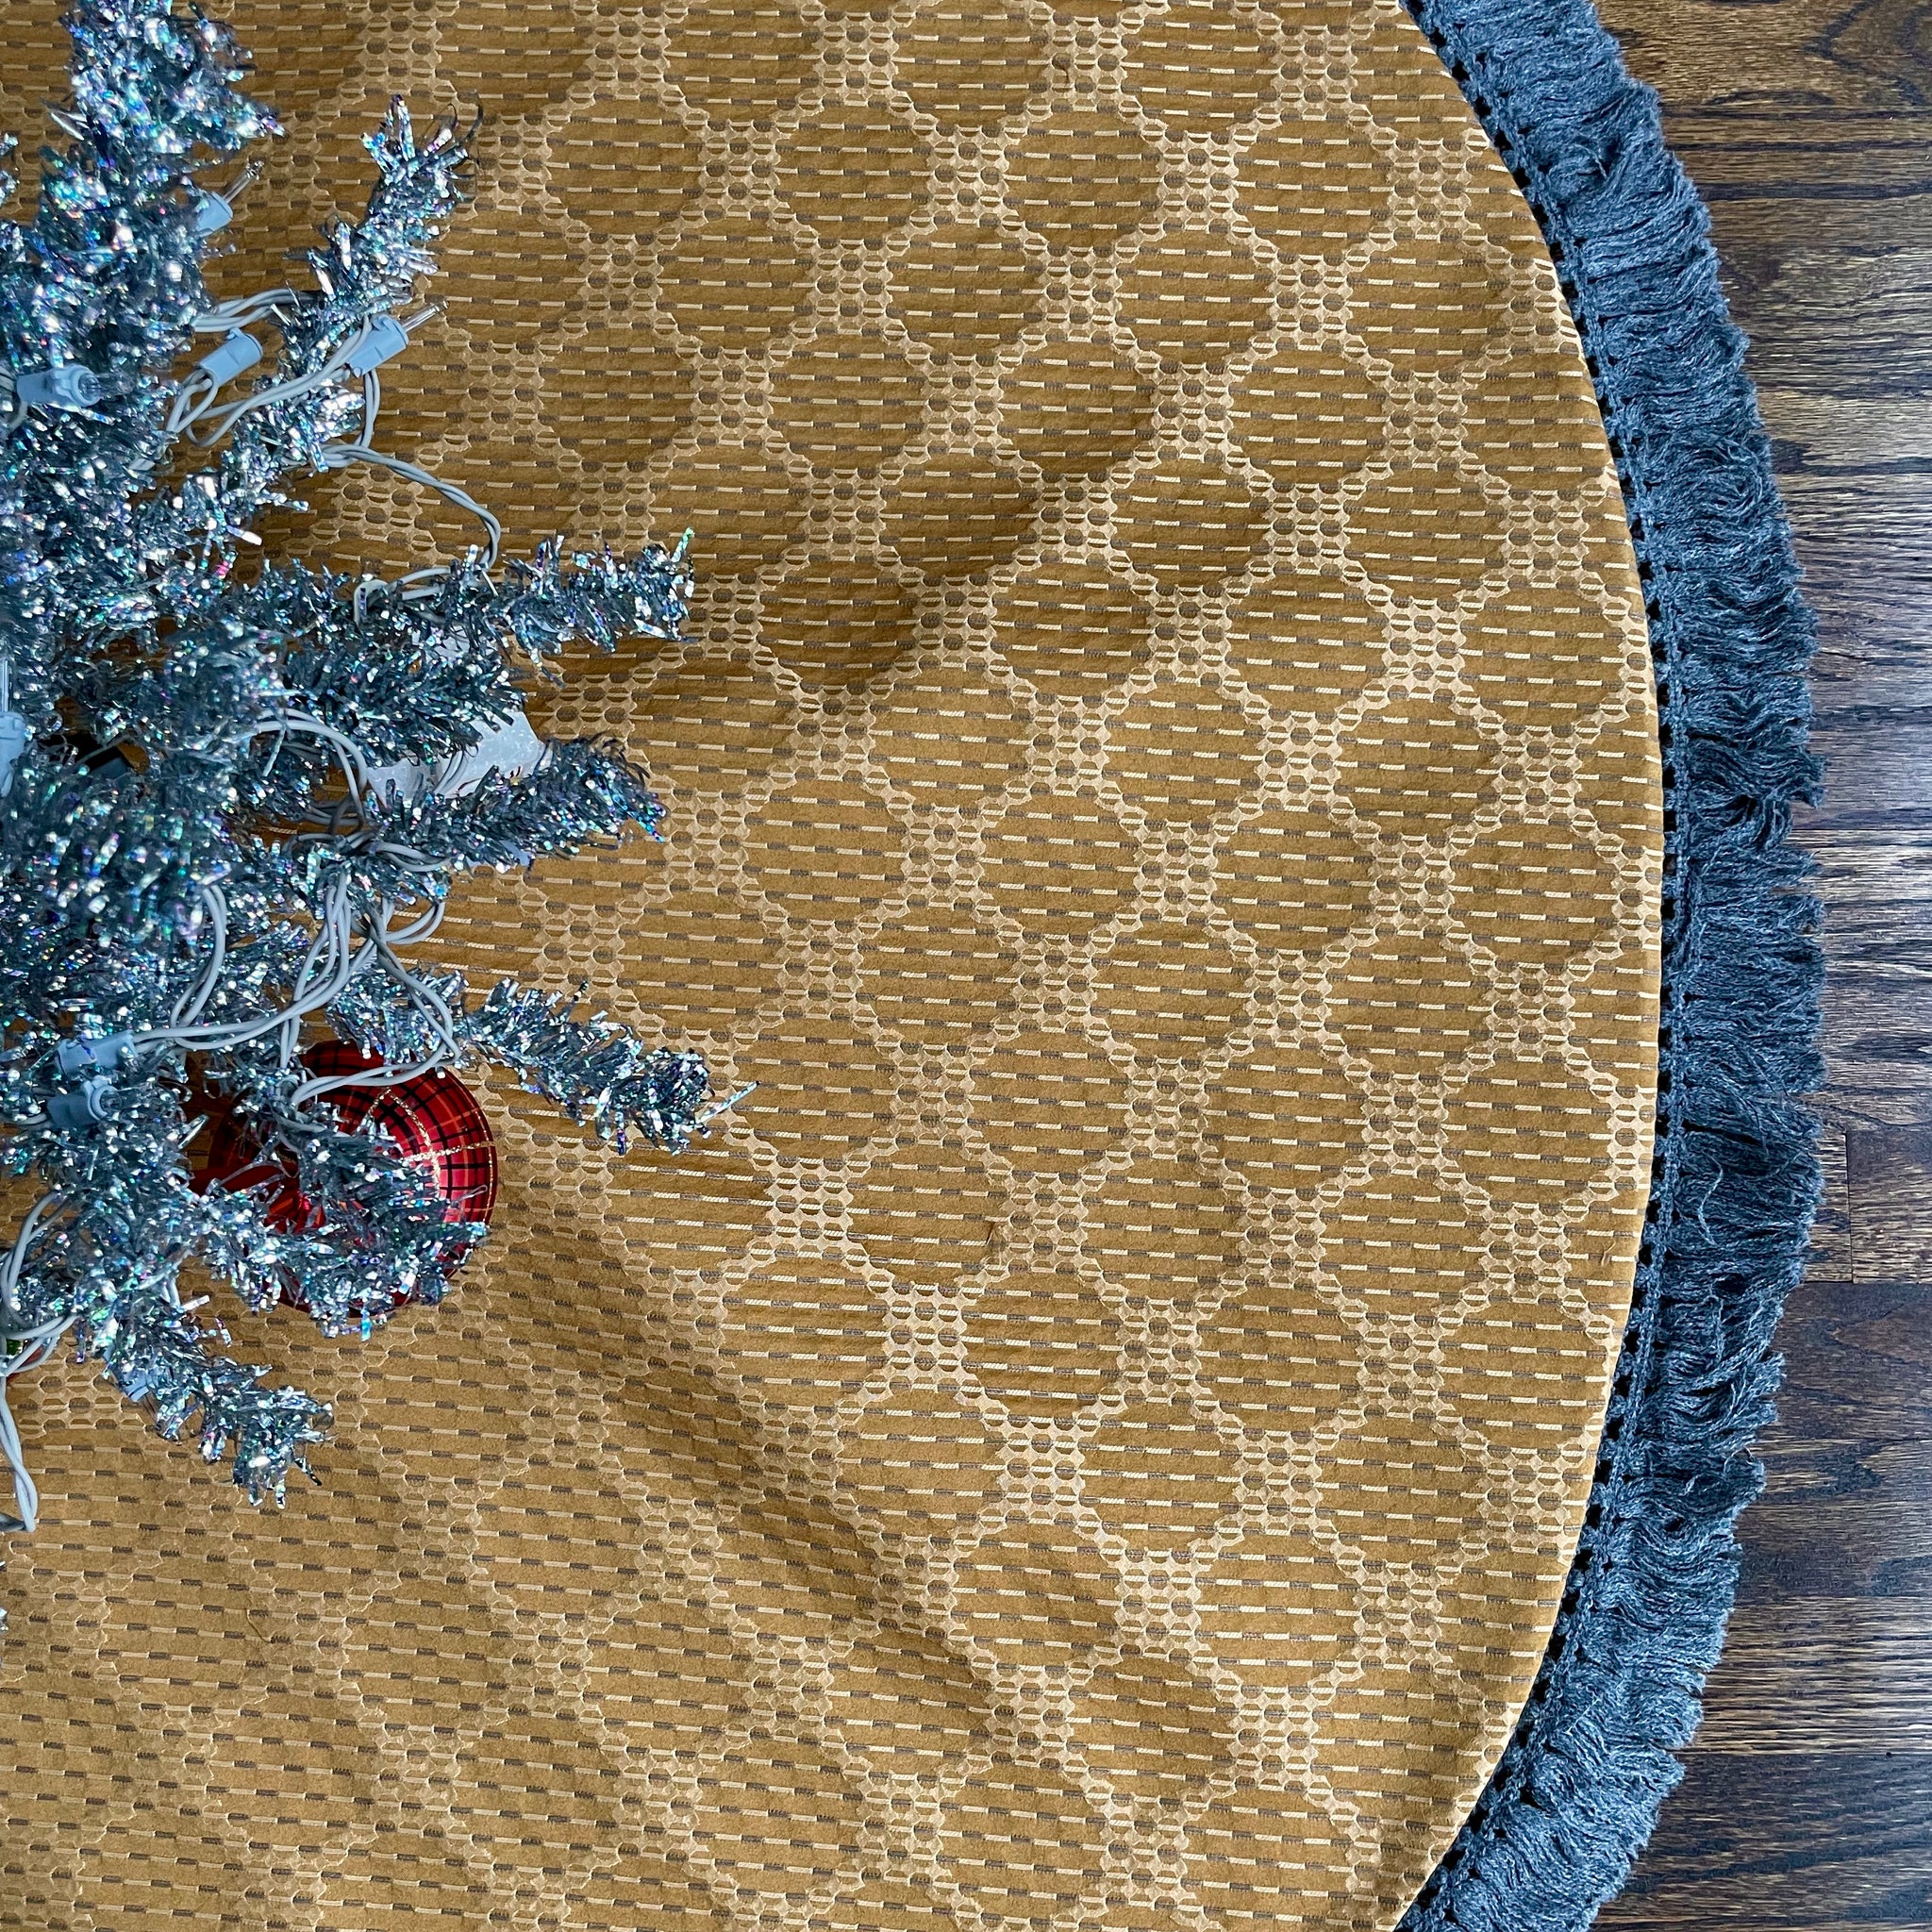 48" Gold and Gray Christmas Tree Skirt with Fringe | Reversible